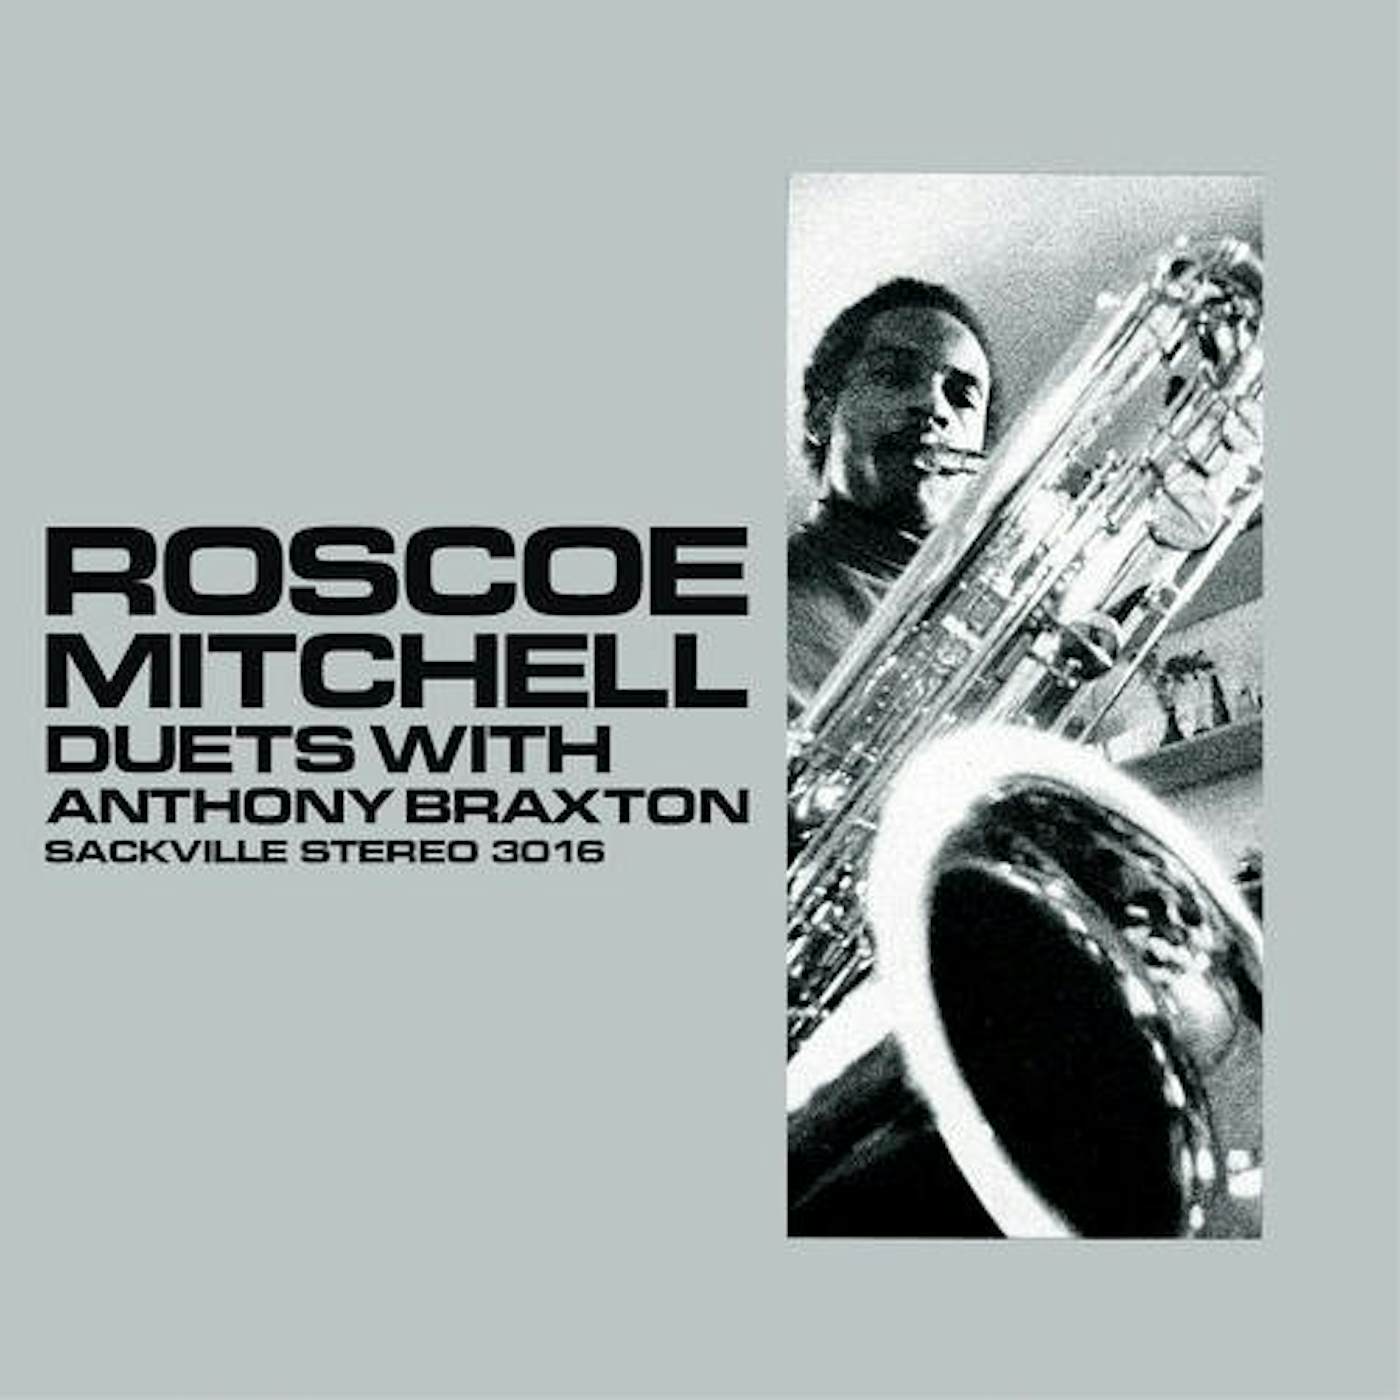 Roscoe Mitchell DUETS WITH ANTHONY BRAXTON CD